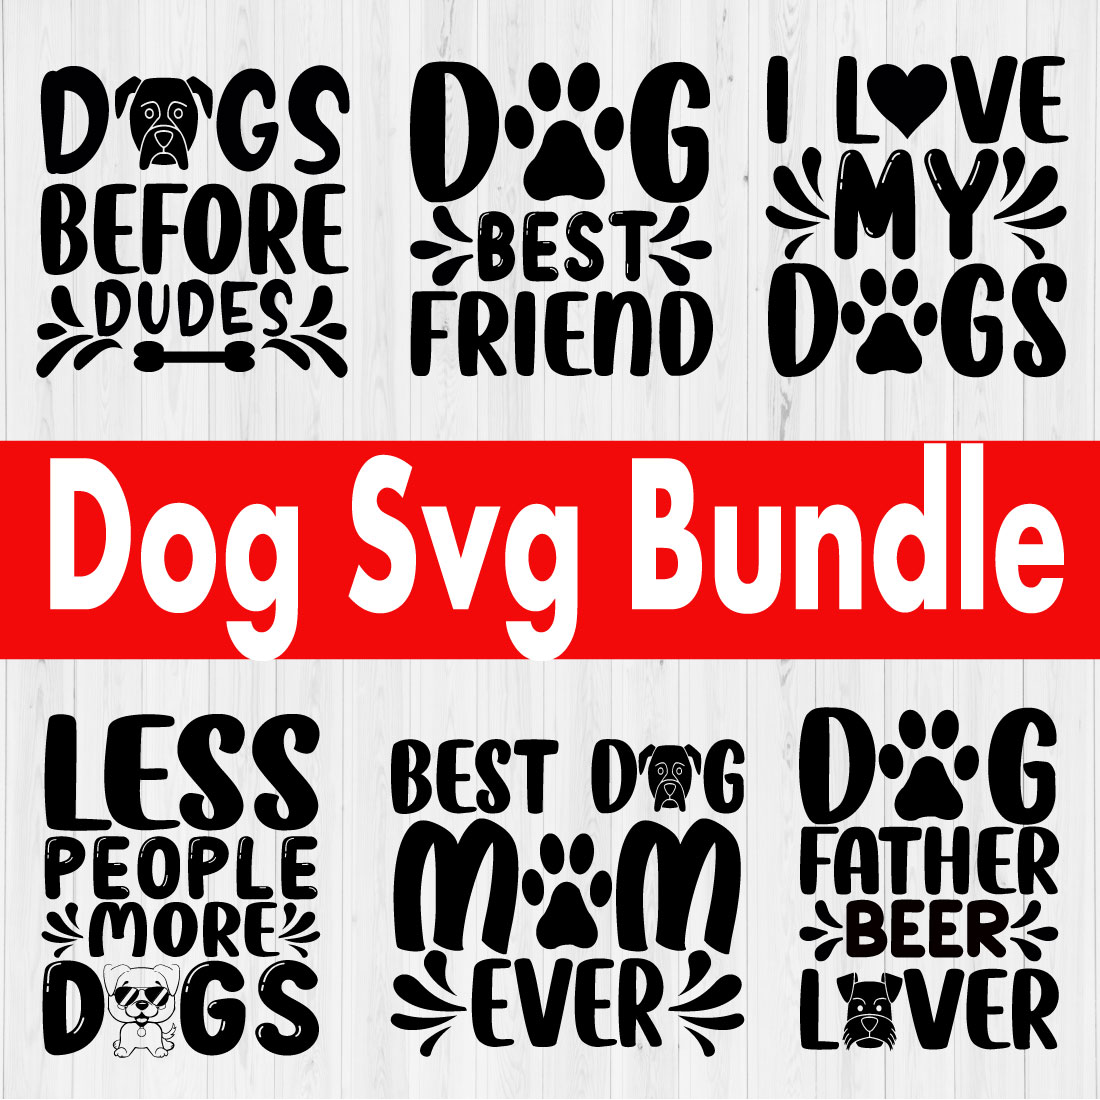 Dog Lovers Quotes Bundle Vol21 cover image.